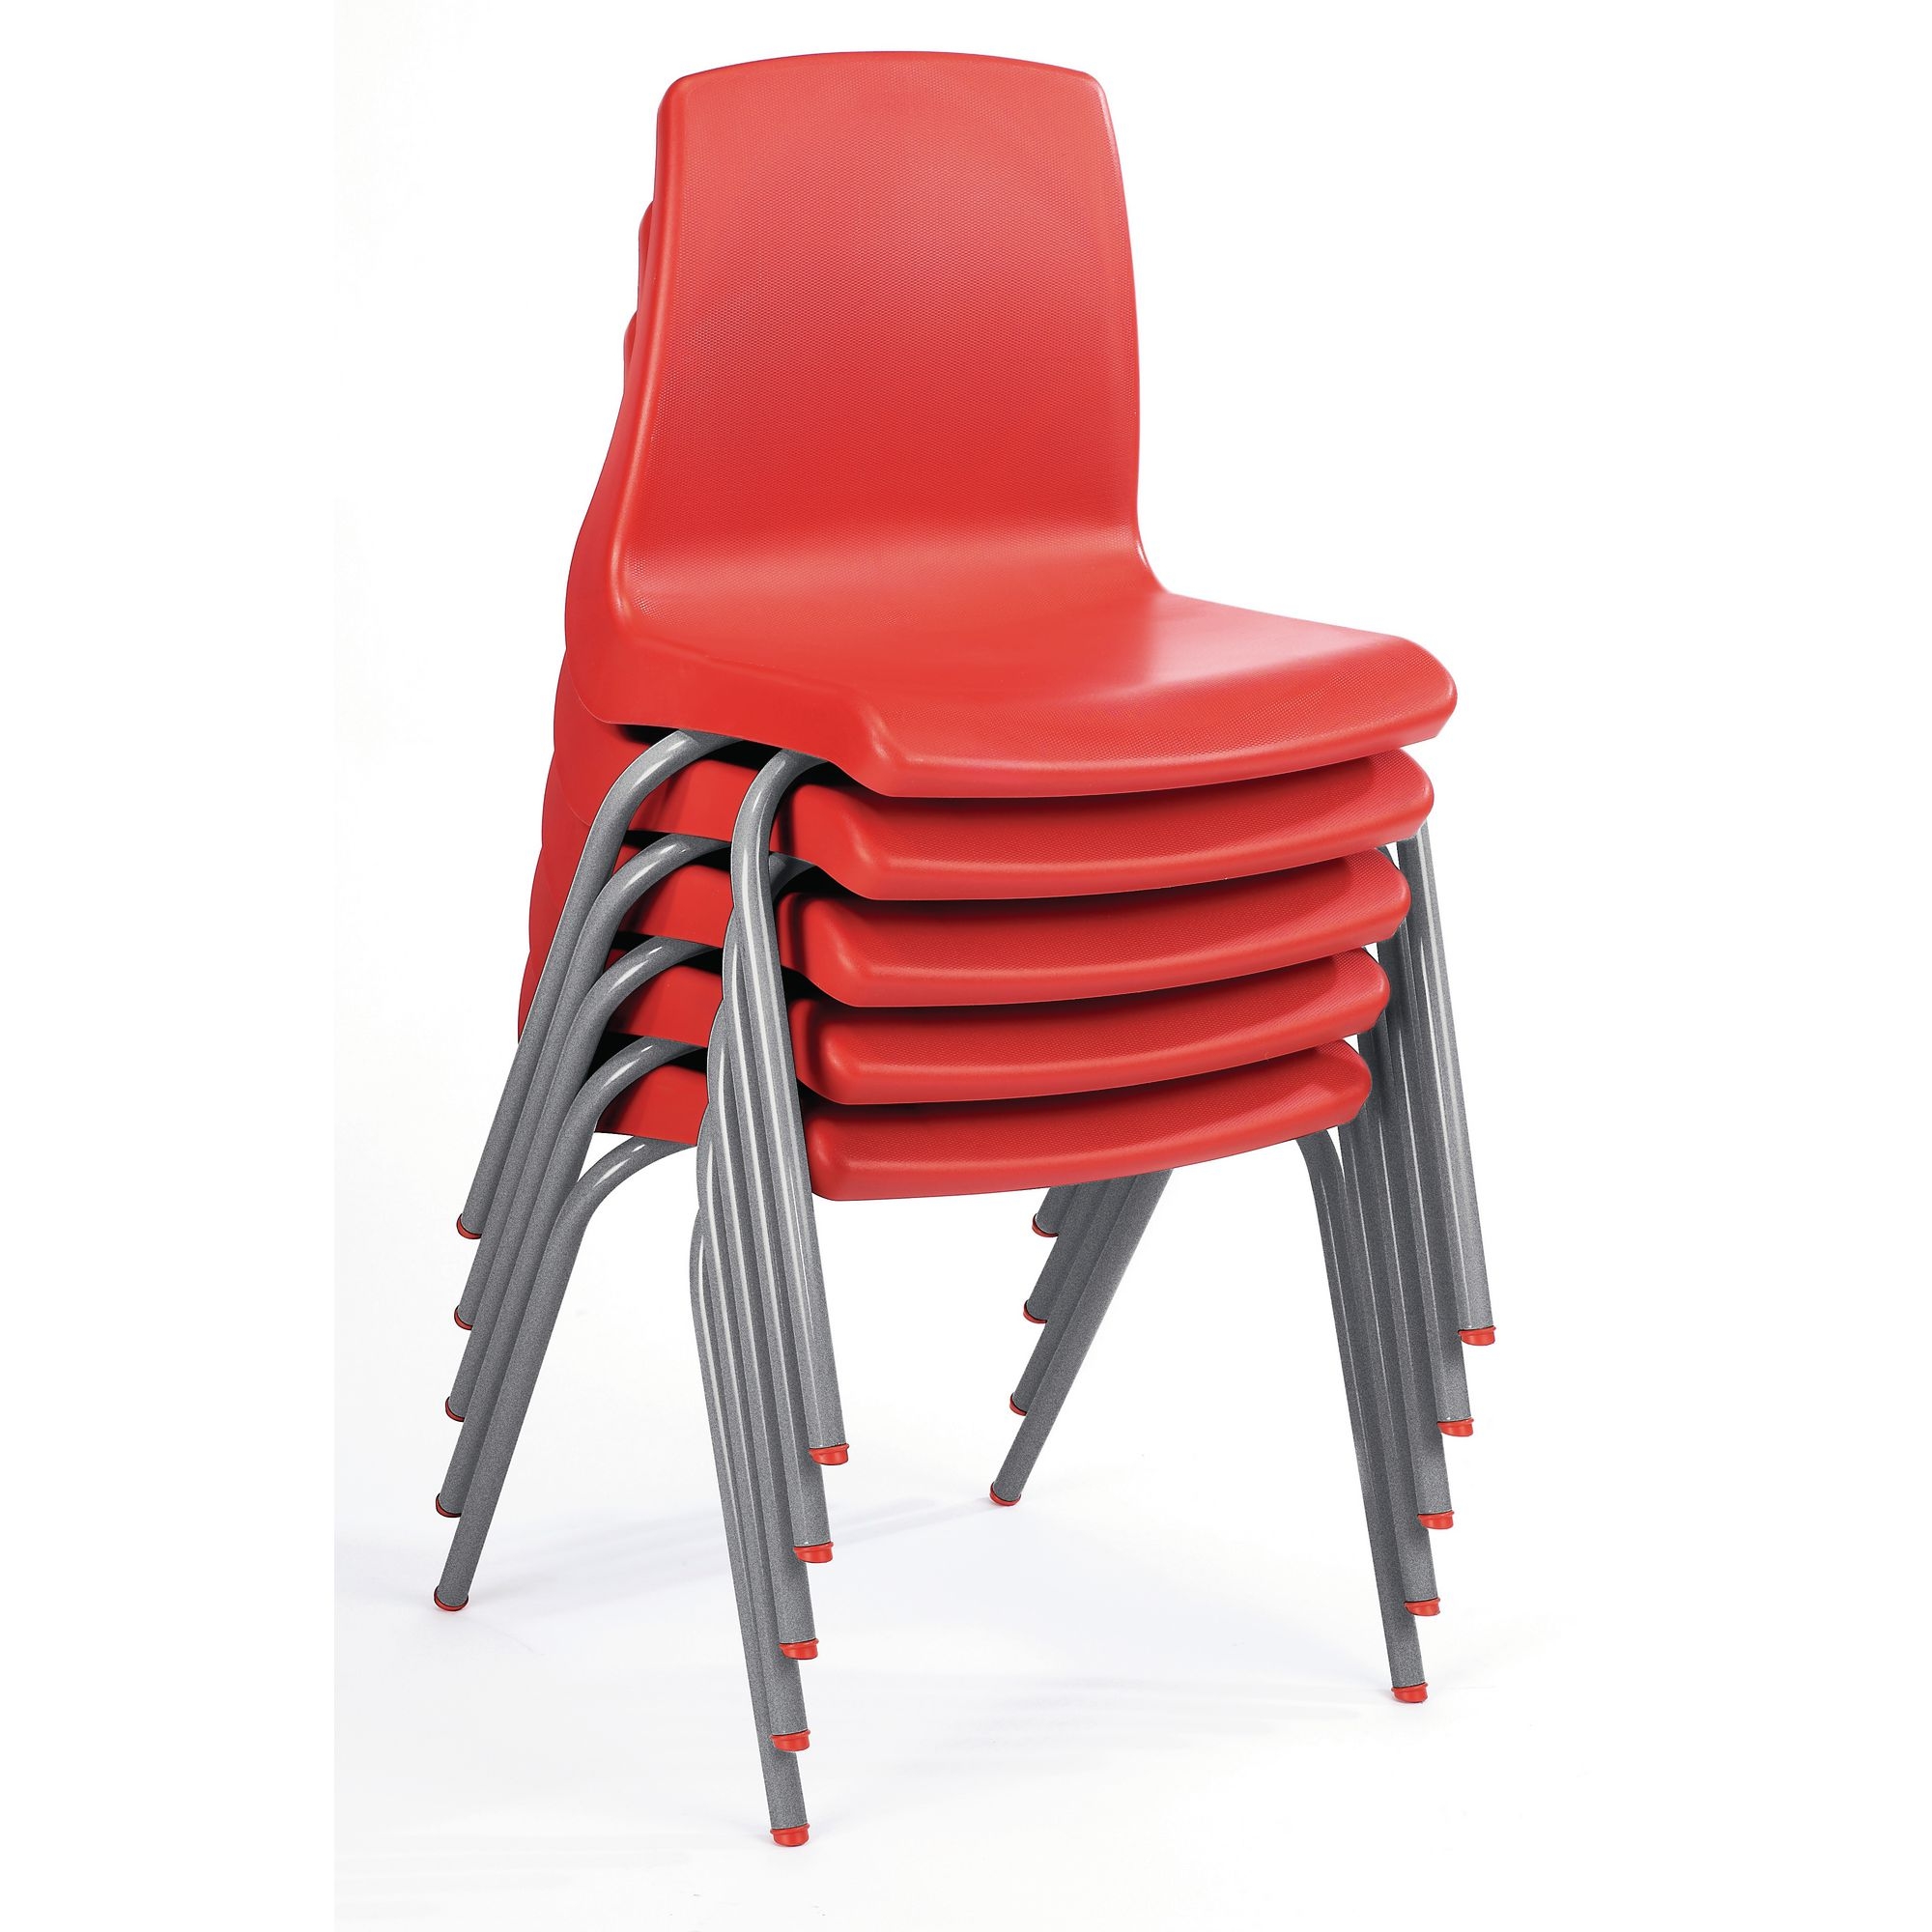 NP Chair Class Pack - Seat height: 310mm - Age 4-6 -Red